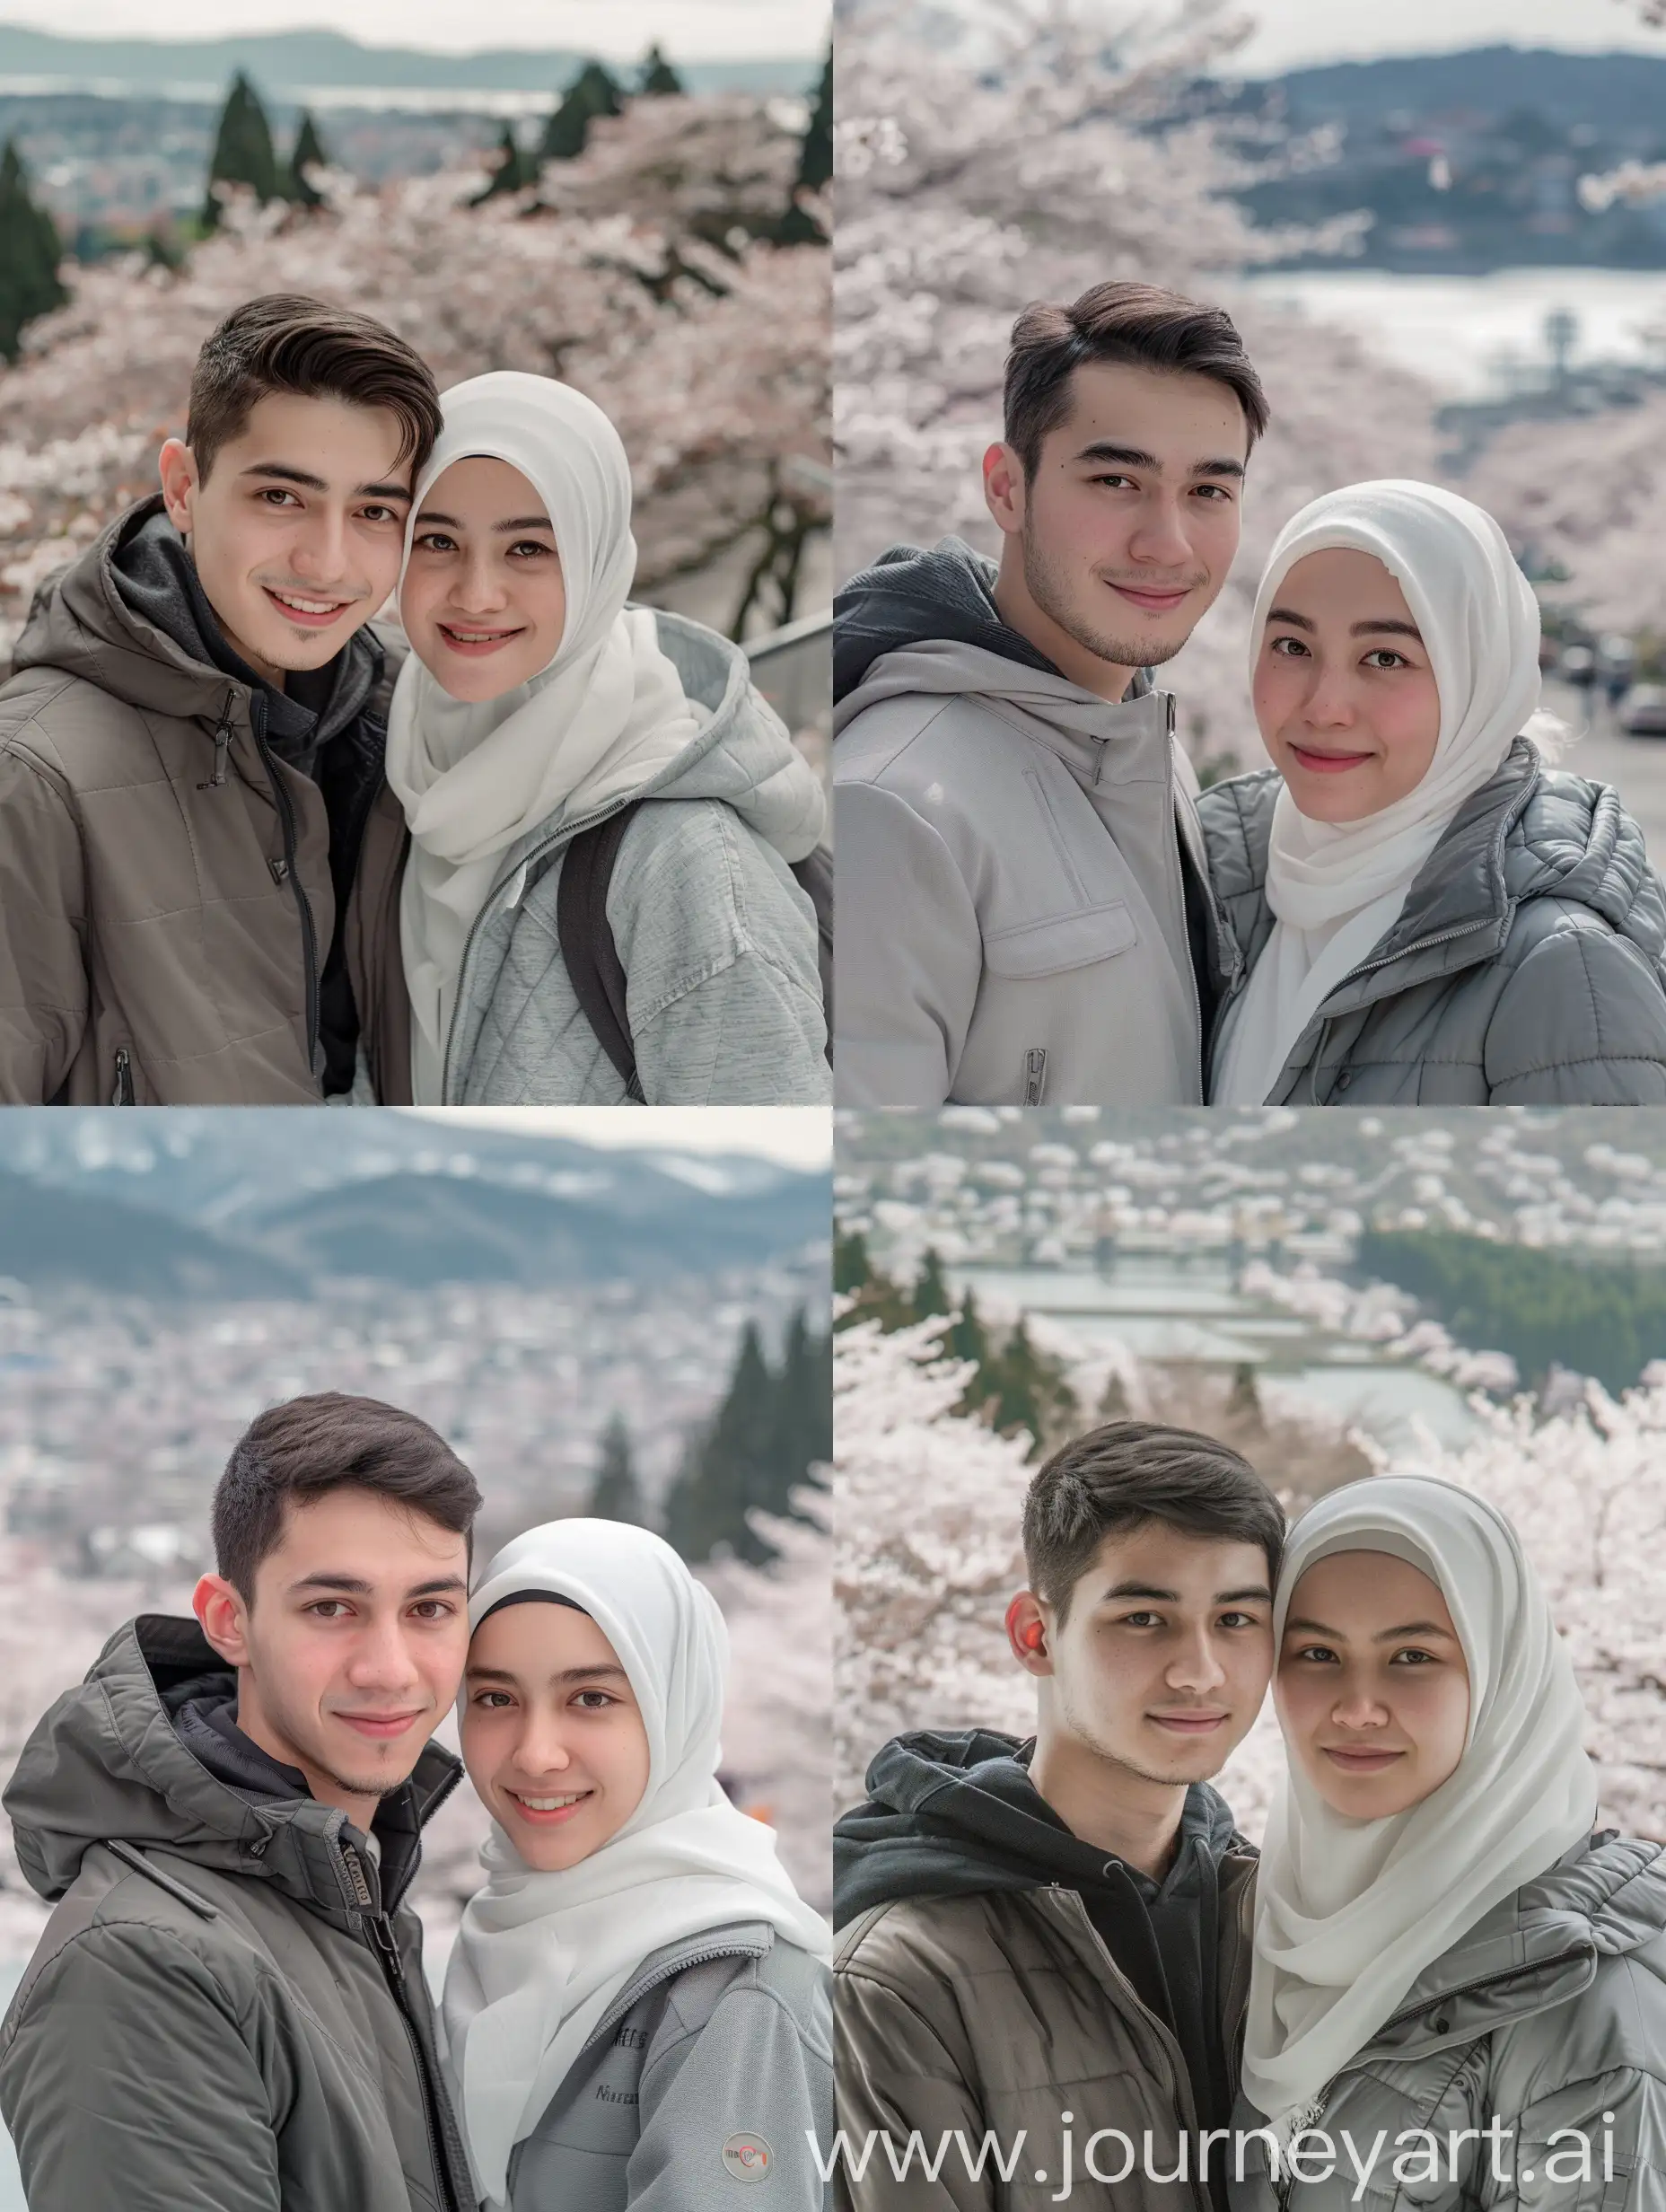 Indonesian-Couple-in-Winter-Jackets-Smiling-Under-Cherry-Blossom-Trees